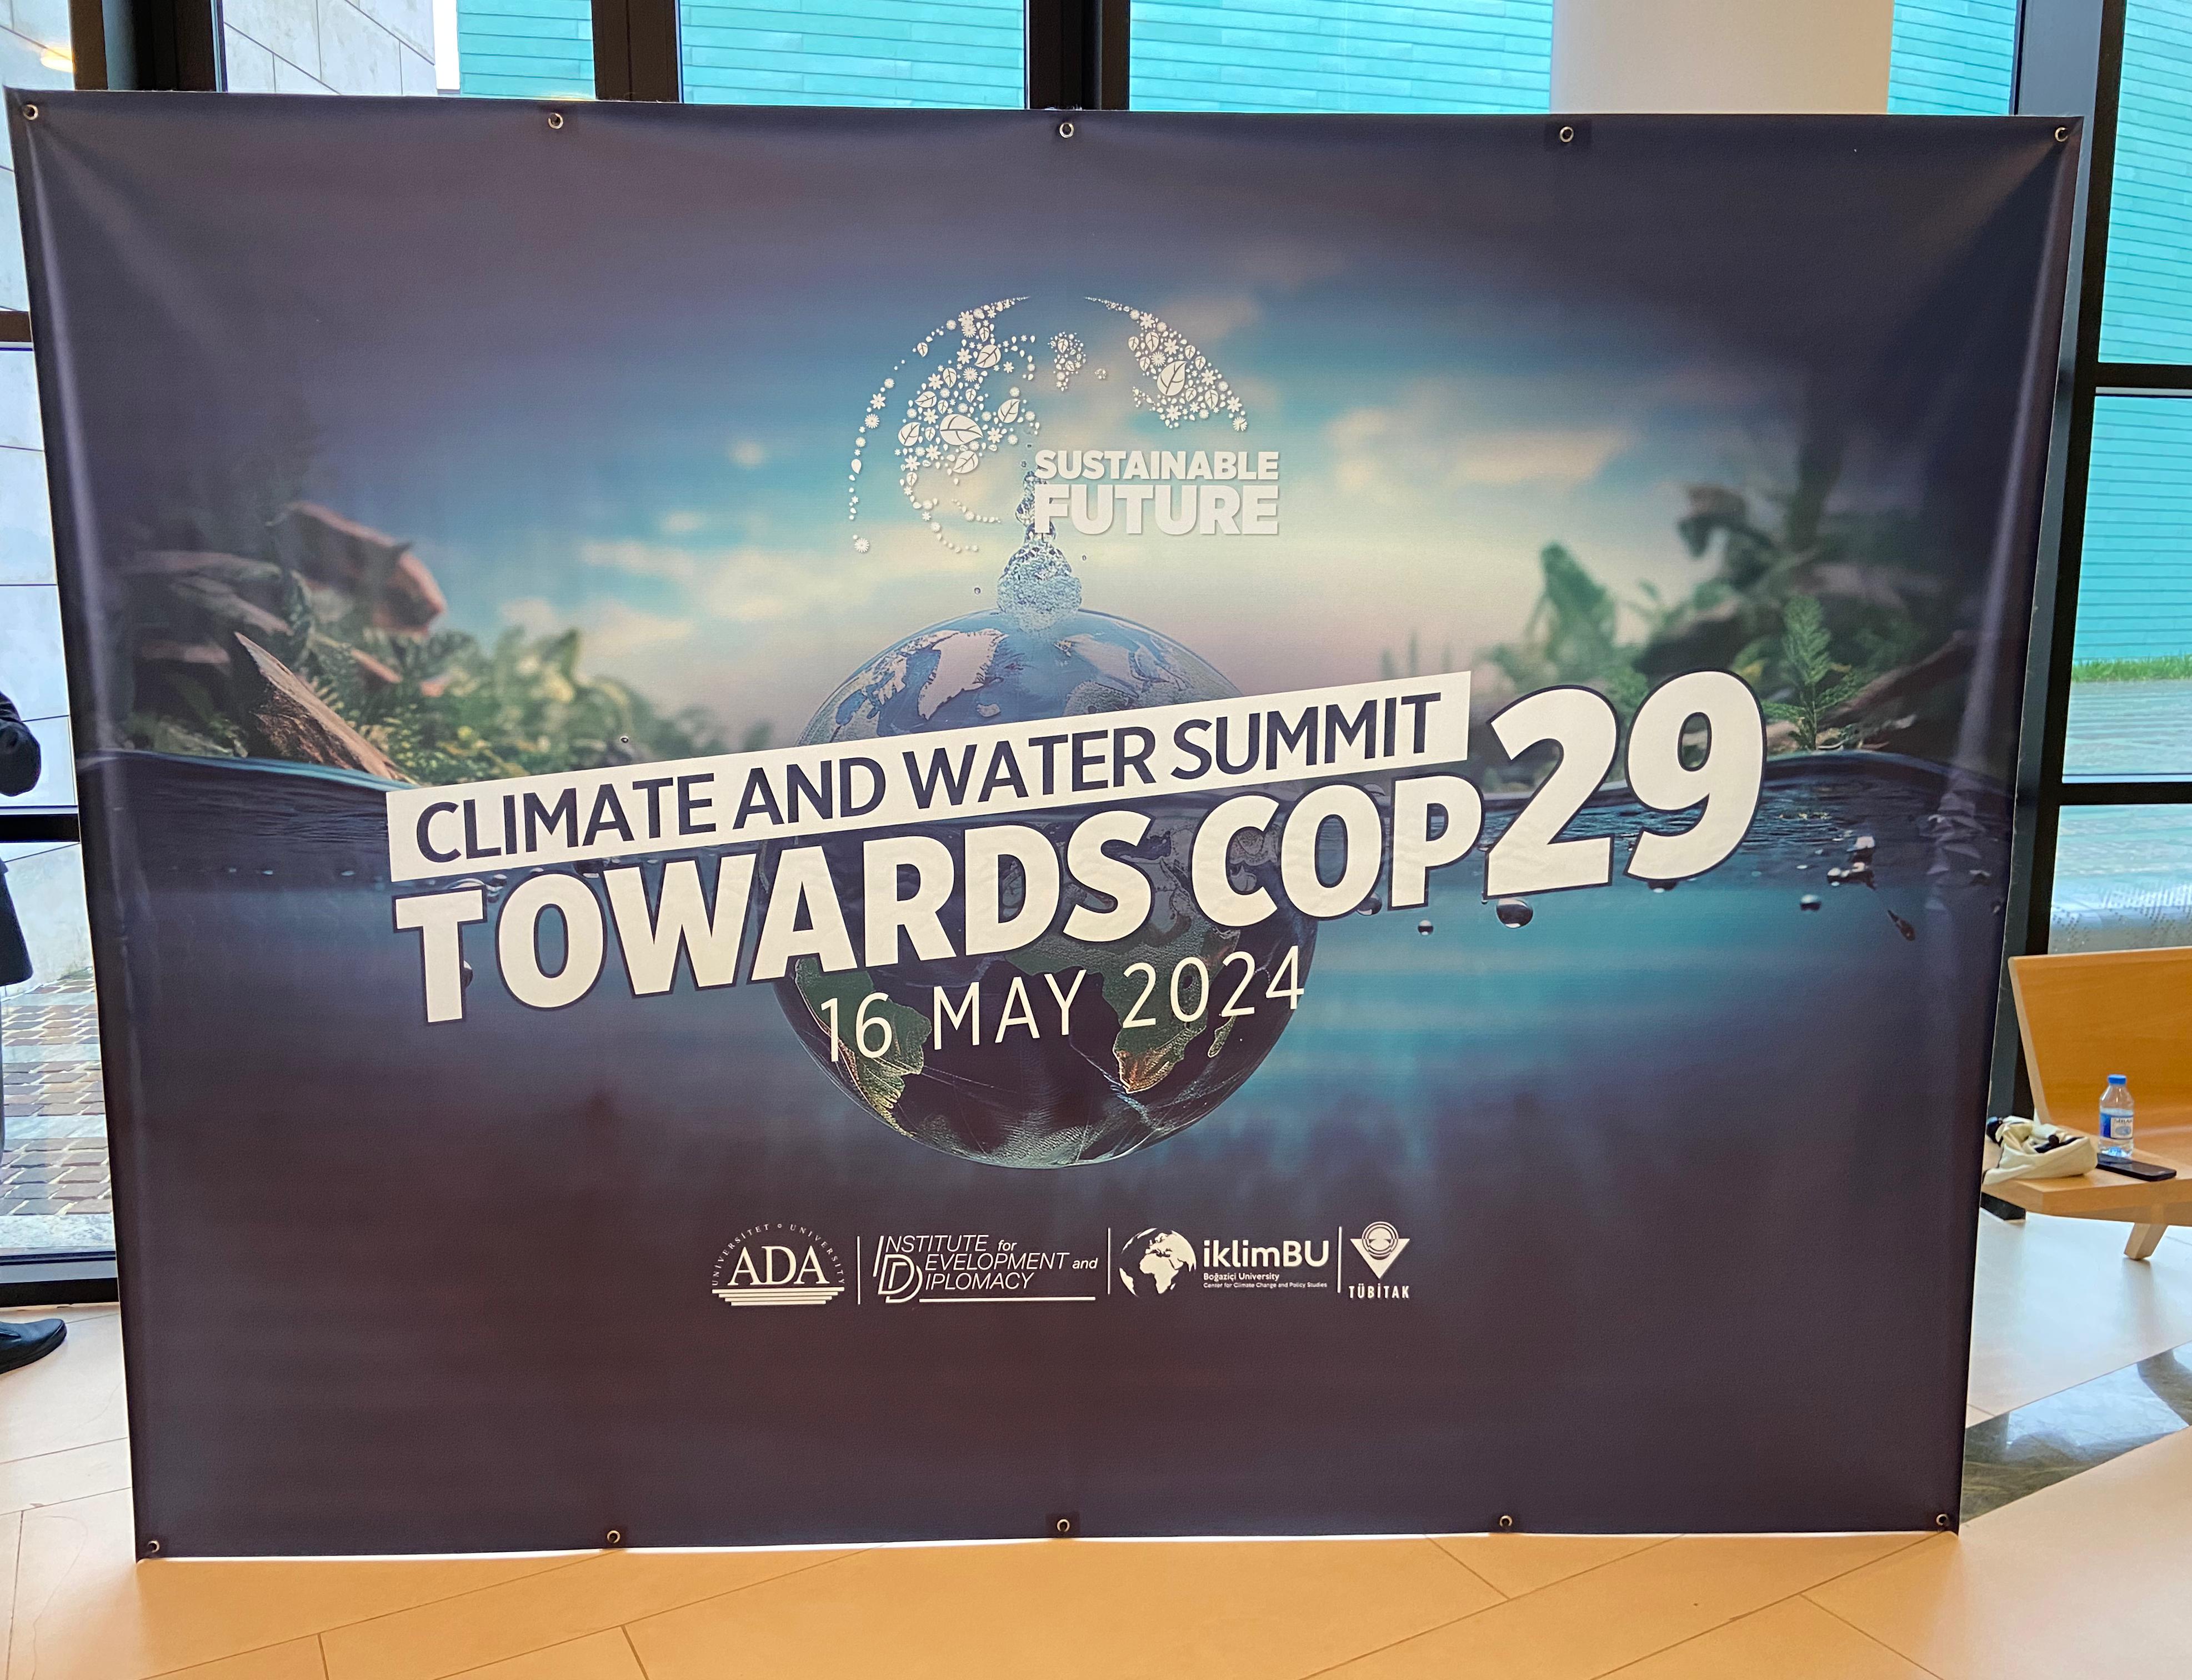 ADA University Hosts "Climate and Water Summit Towards COP29"